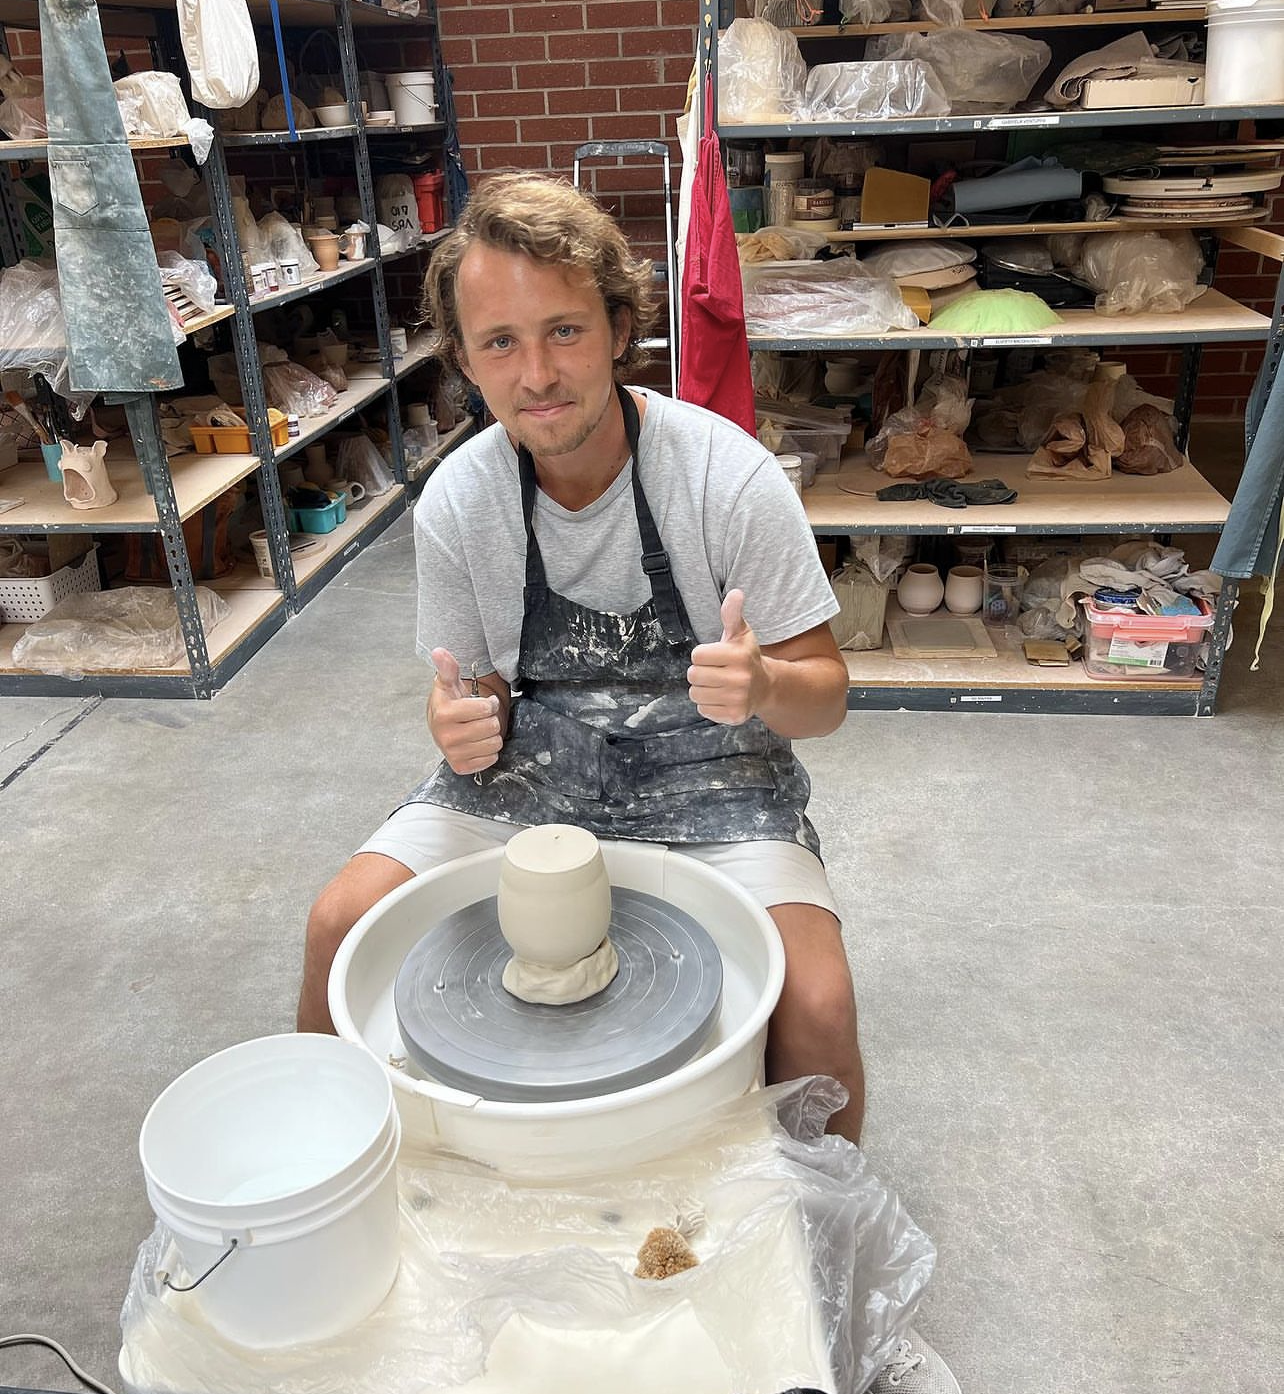 Claytivity Pottery Studio Now Open in Burbank with Classes, Workshops, and  Memberships - myBurbank